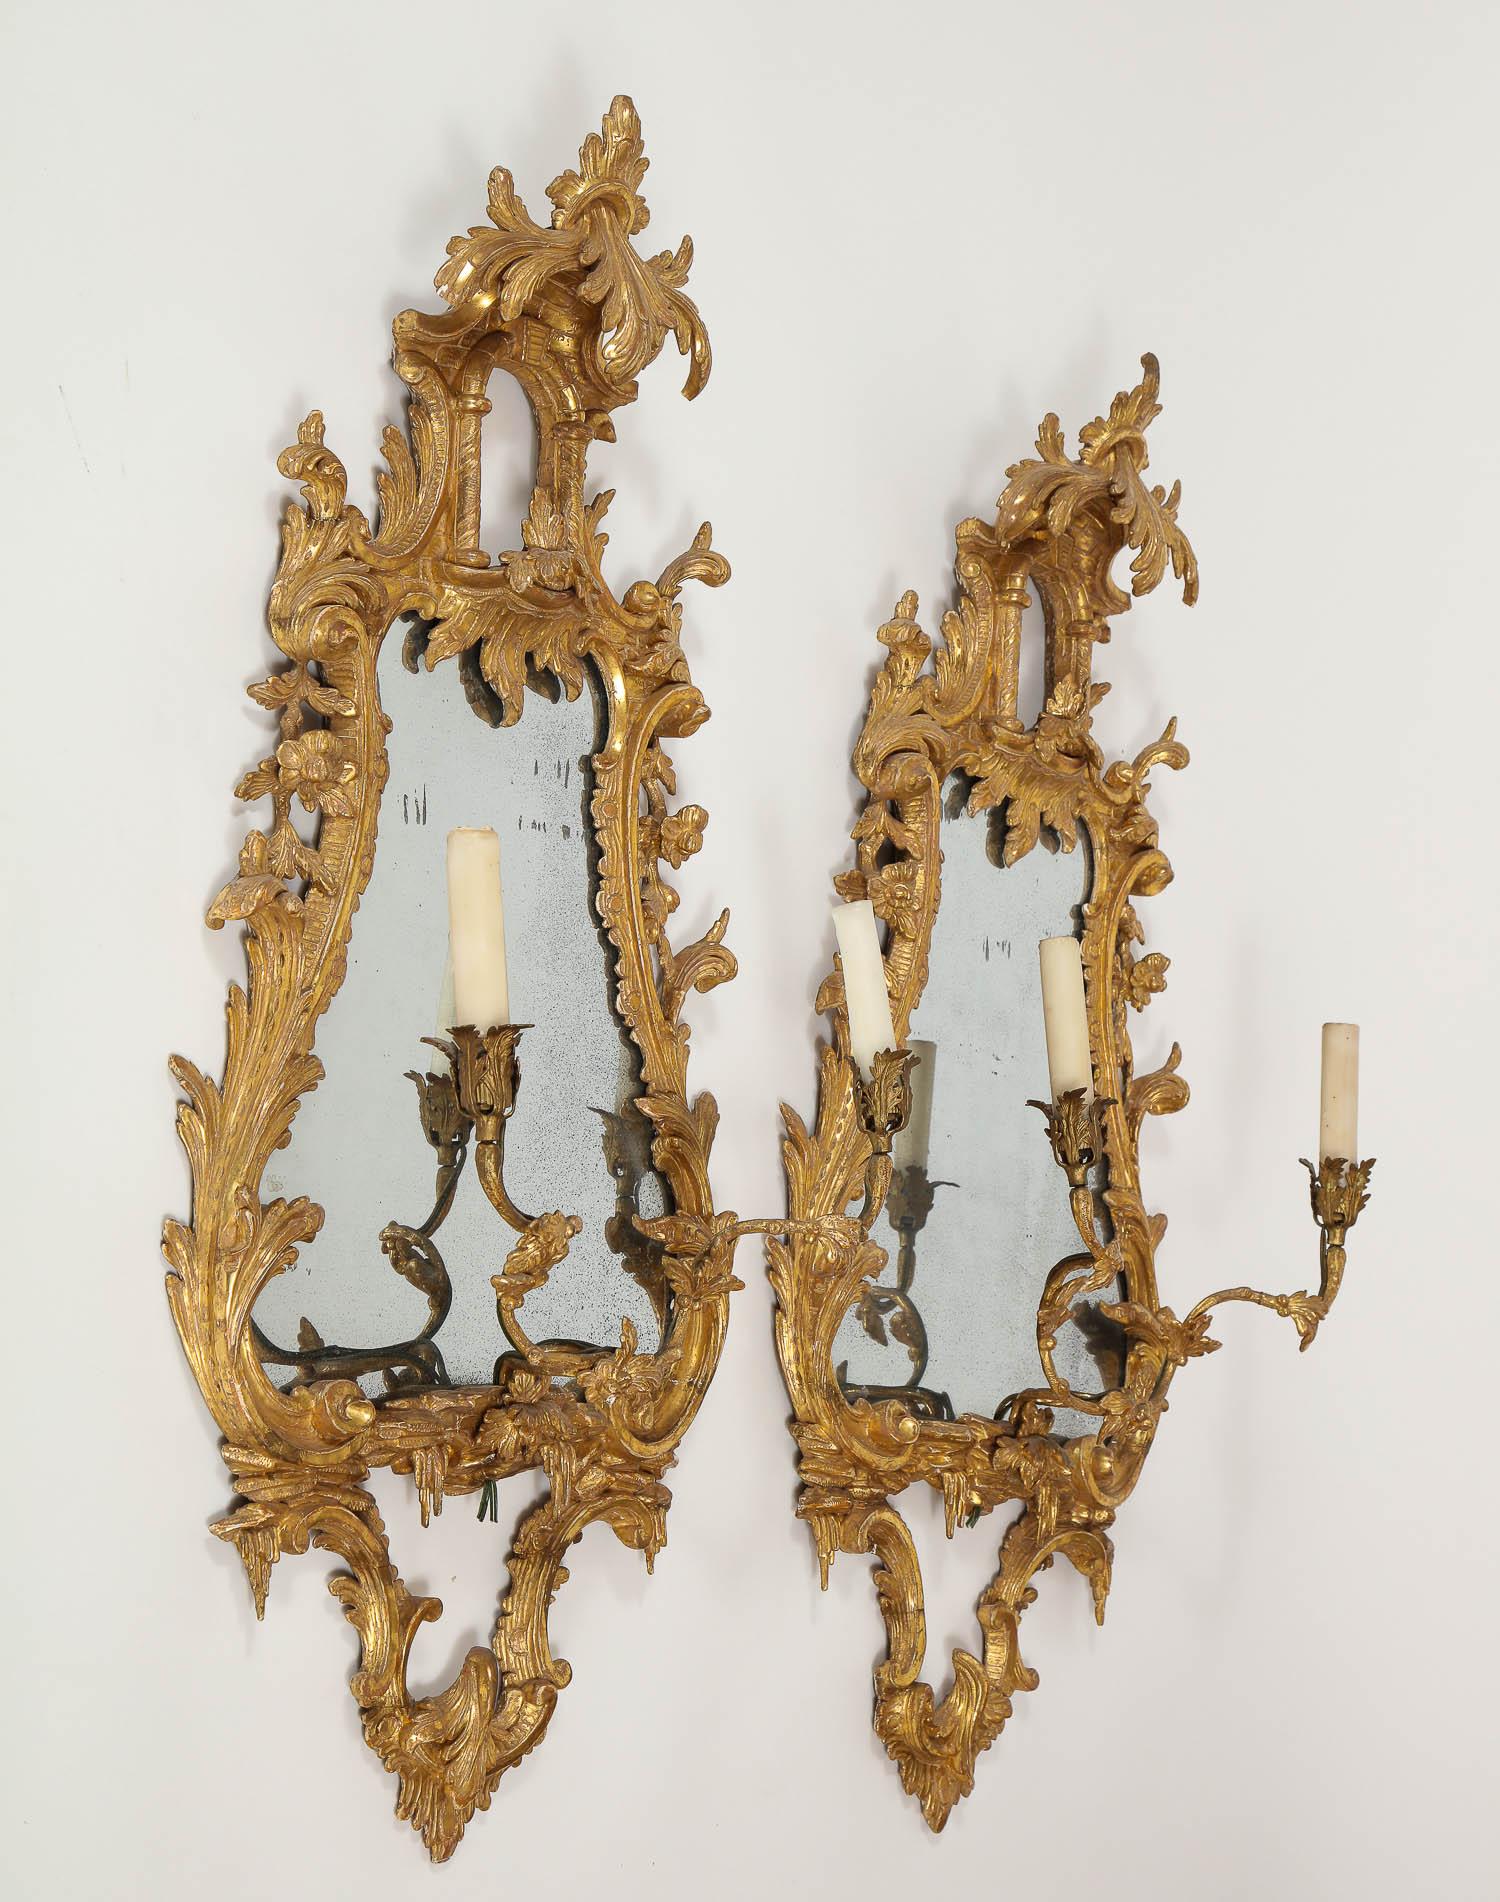 Beautiful pair of antique 18th century George II chinoiserie English carved giltwood mirrors with candleholders. These magnificently hand-carved giltwood mirrors are meticulously detailed and adorned with acanthus leaves flourishing throughout the